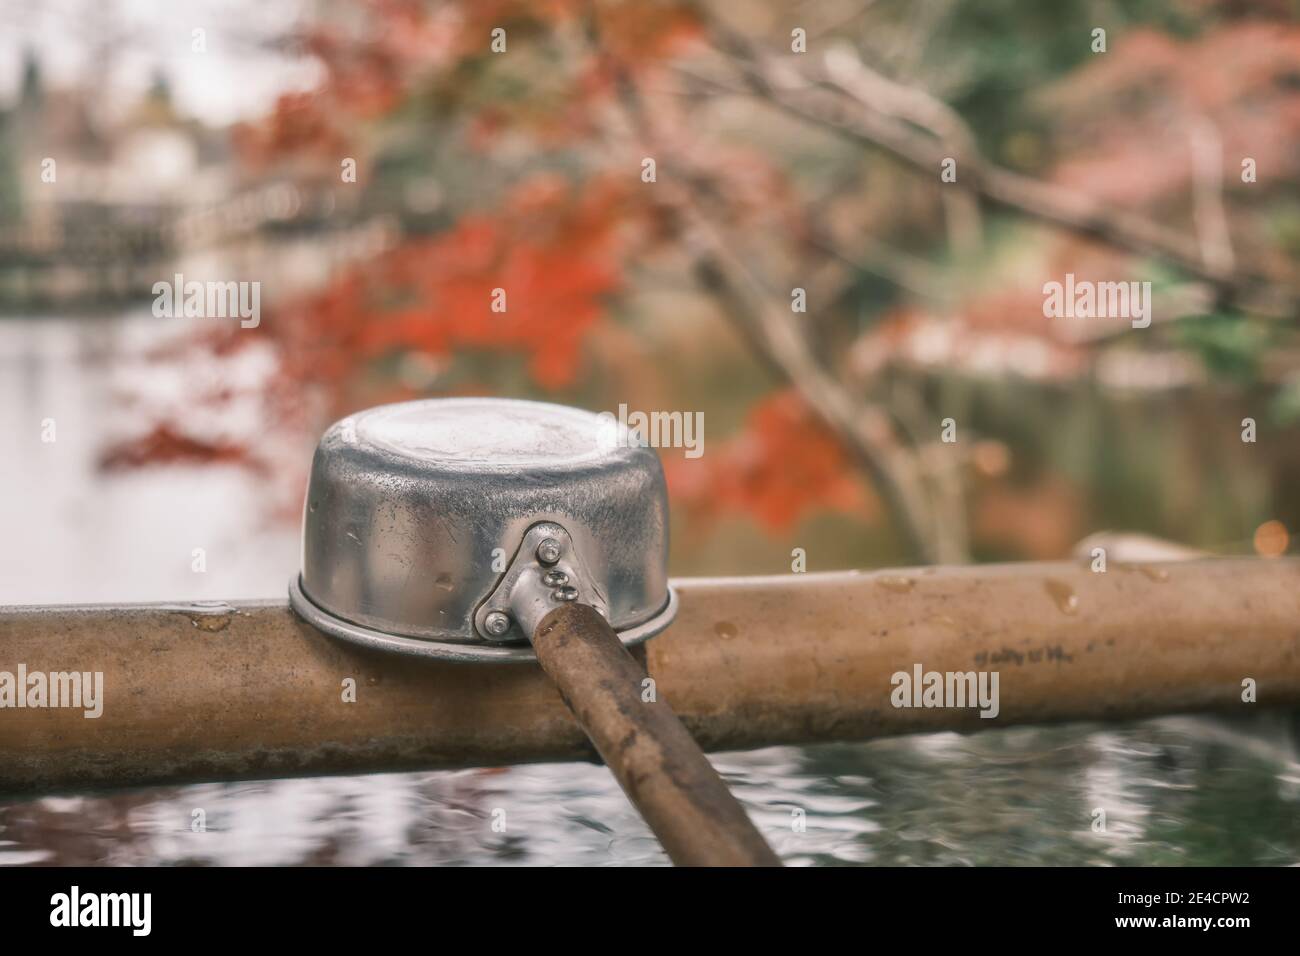 A hishaku (wooden ladle) at a Buddhist temple in Tokyo, Japan. Stock Photo